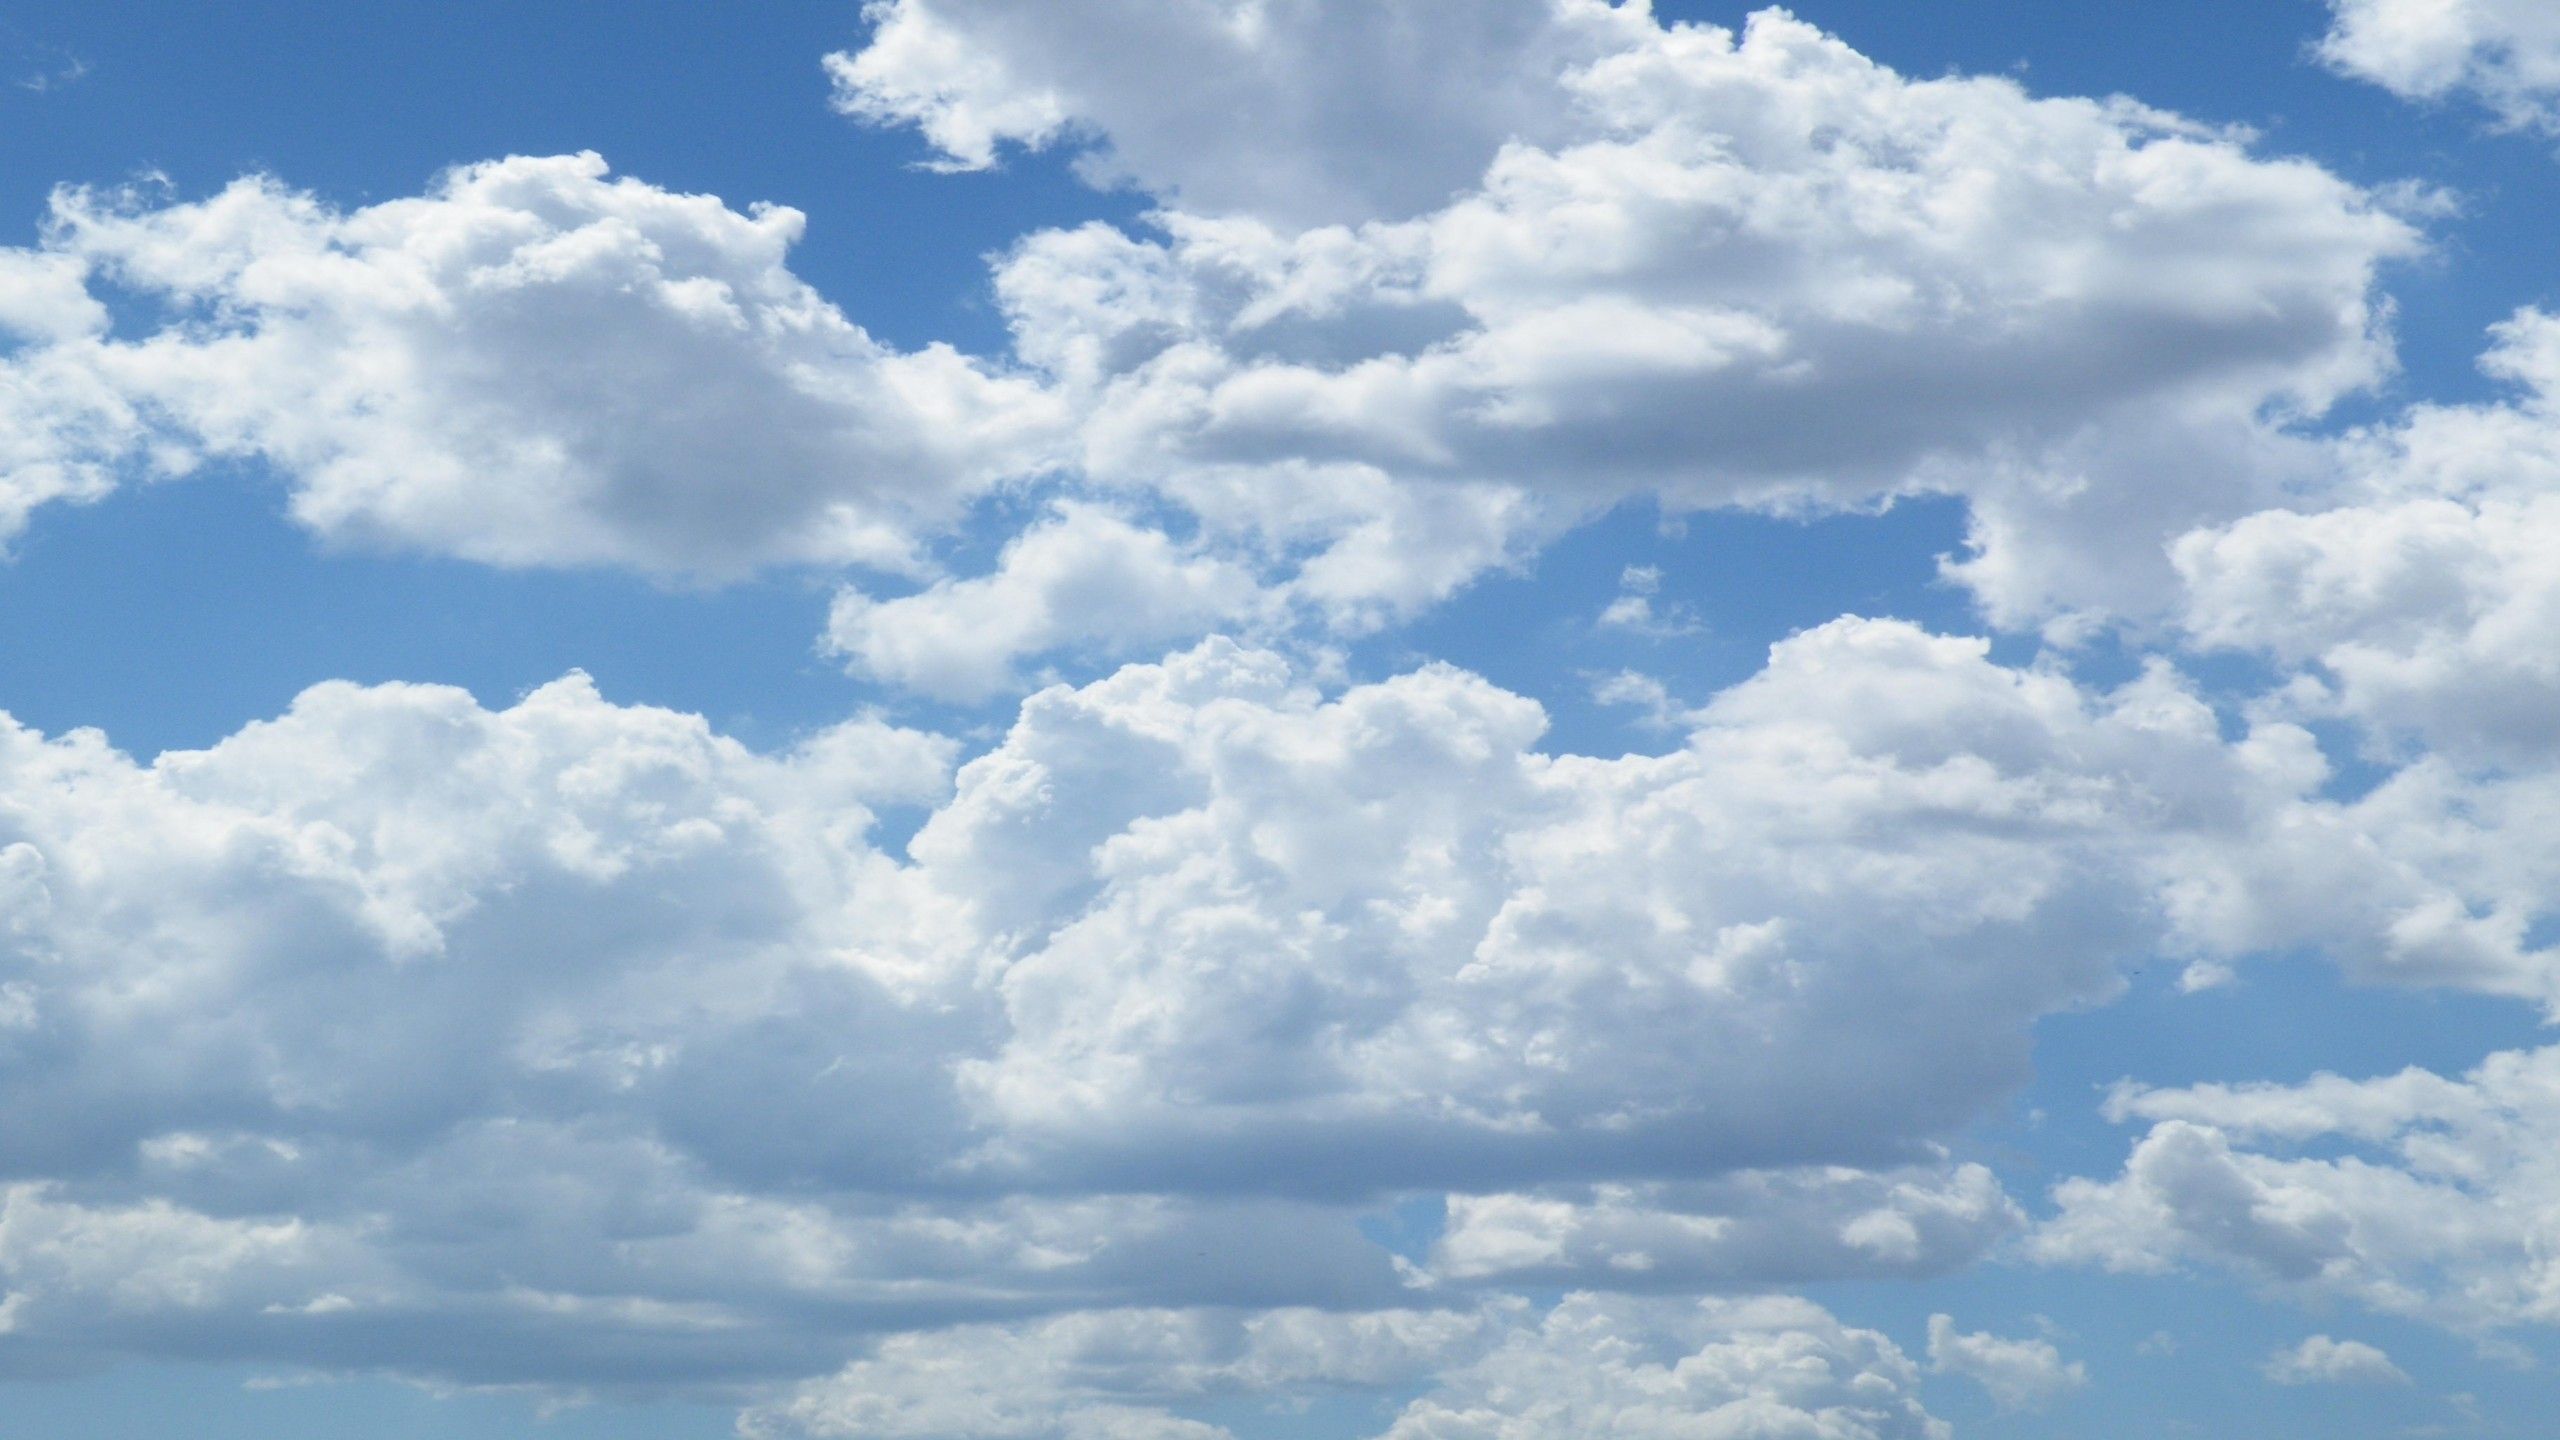 High Resolution Clouds Wallpaper Free High Resolution Clouds Background